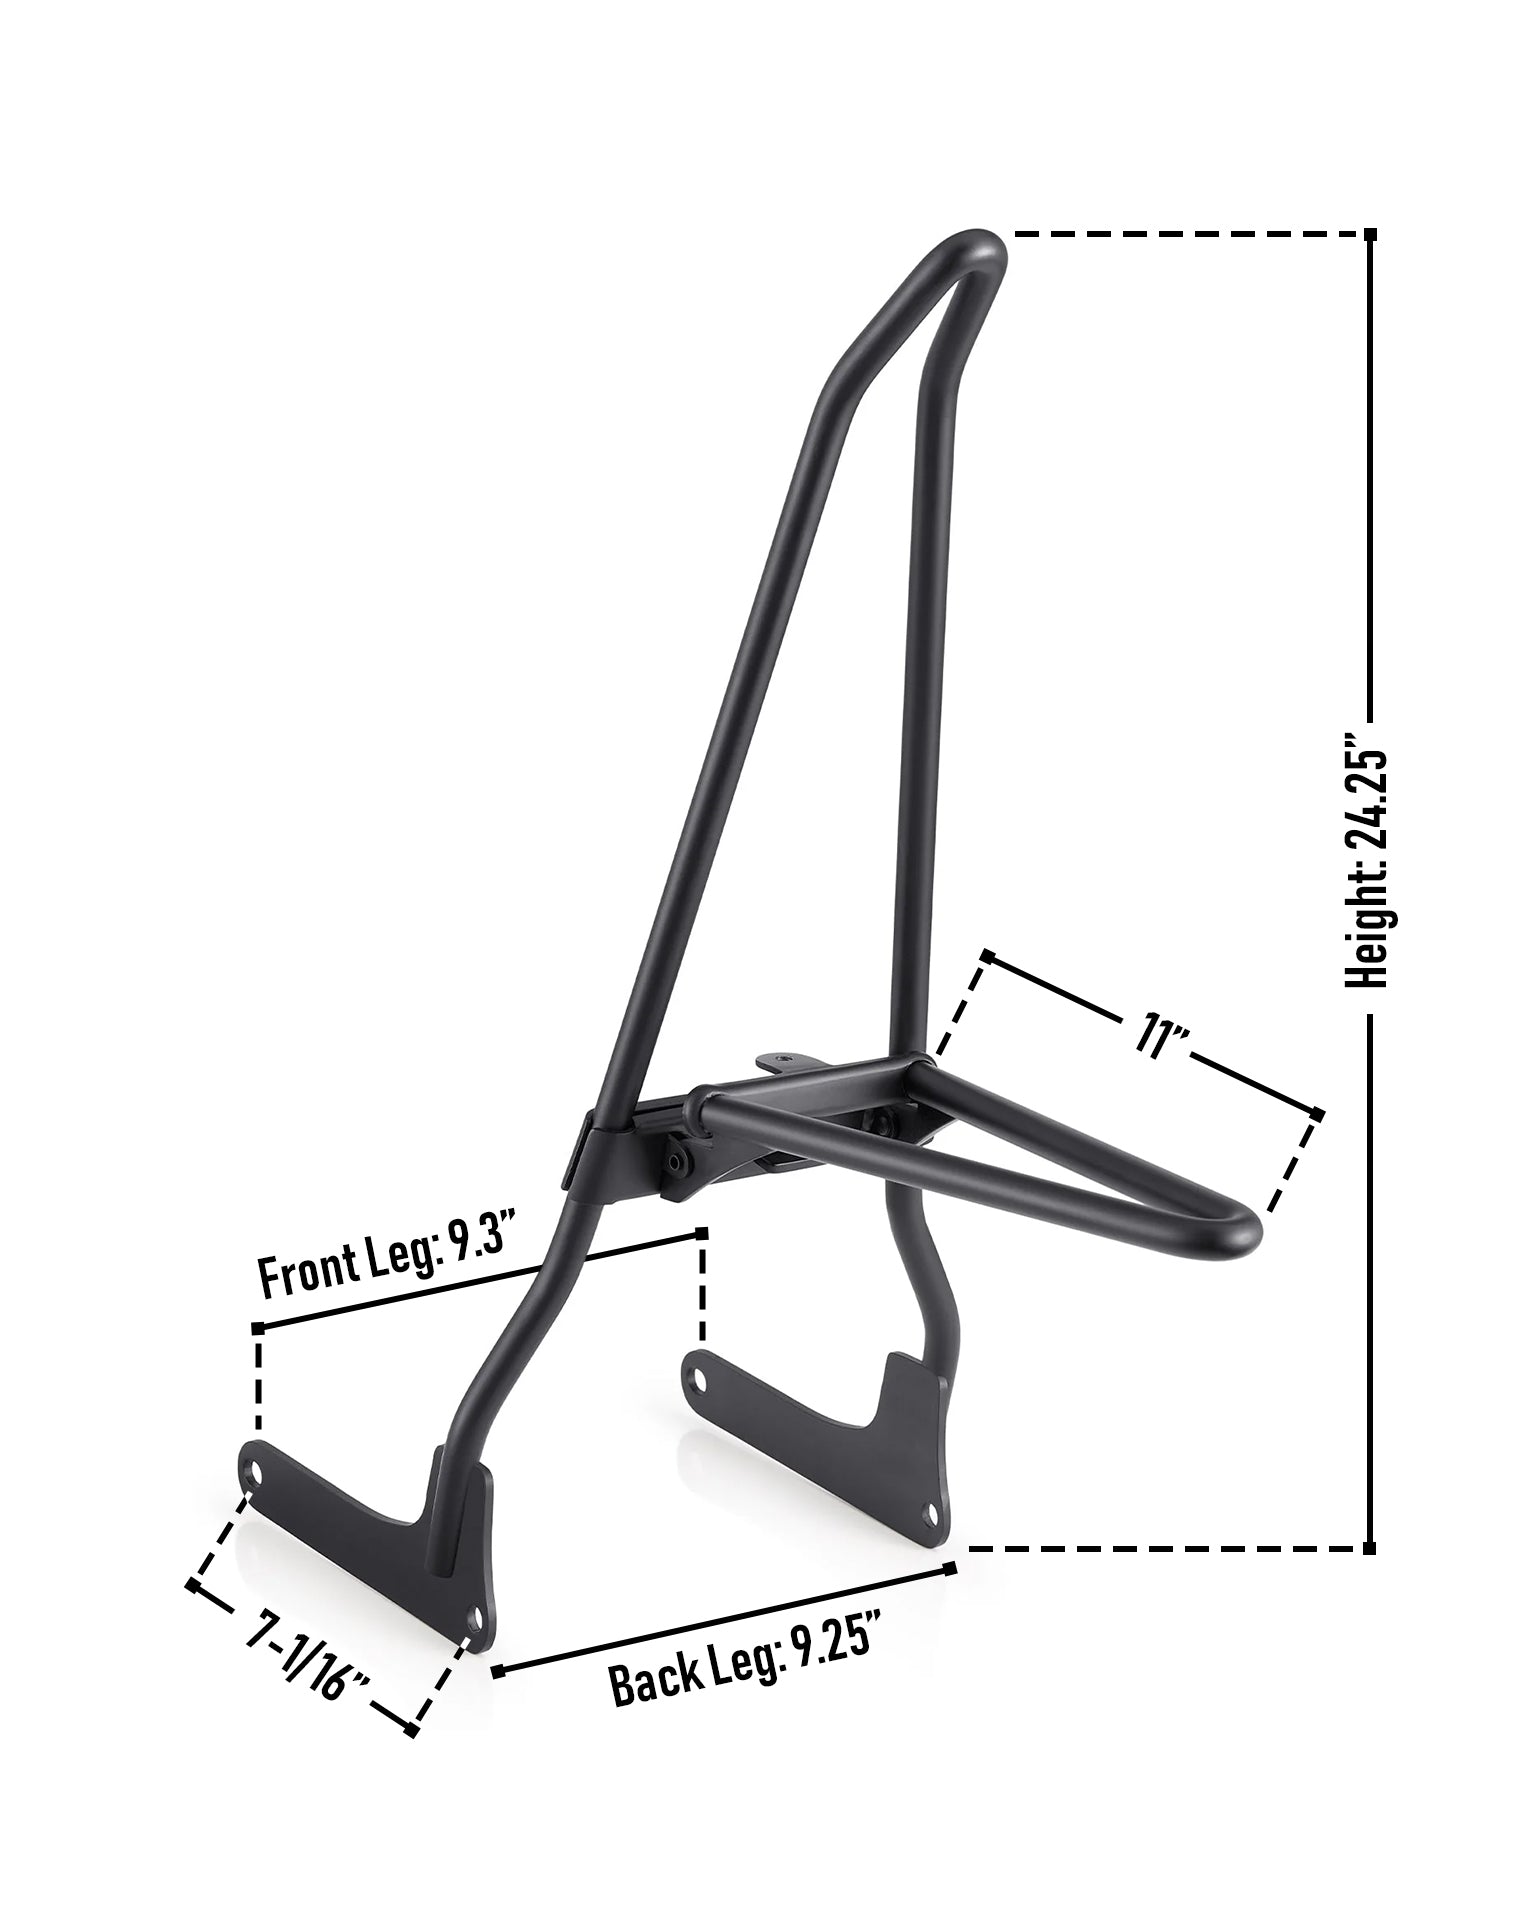 Iron Born Blade 25" Sissy Bar with Foldable Luggage Rack for Harley Softail Standard FXST Matte Black Dimension